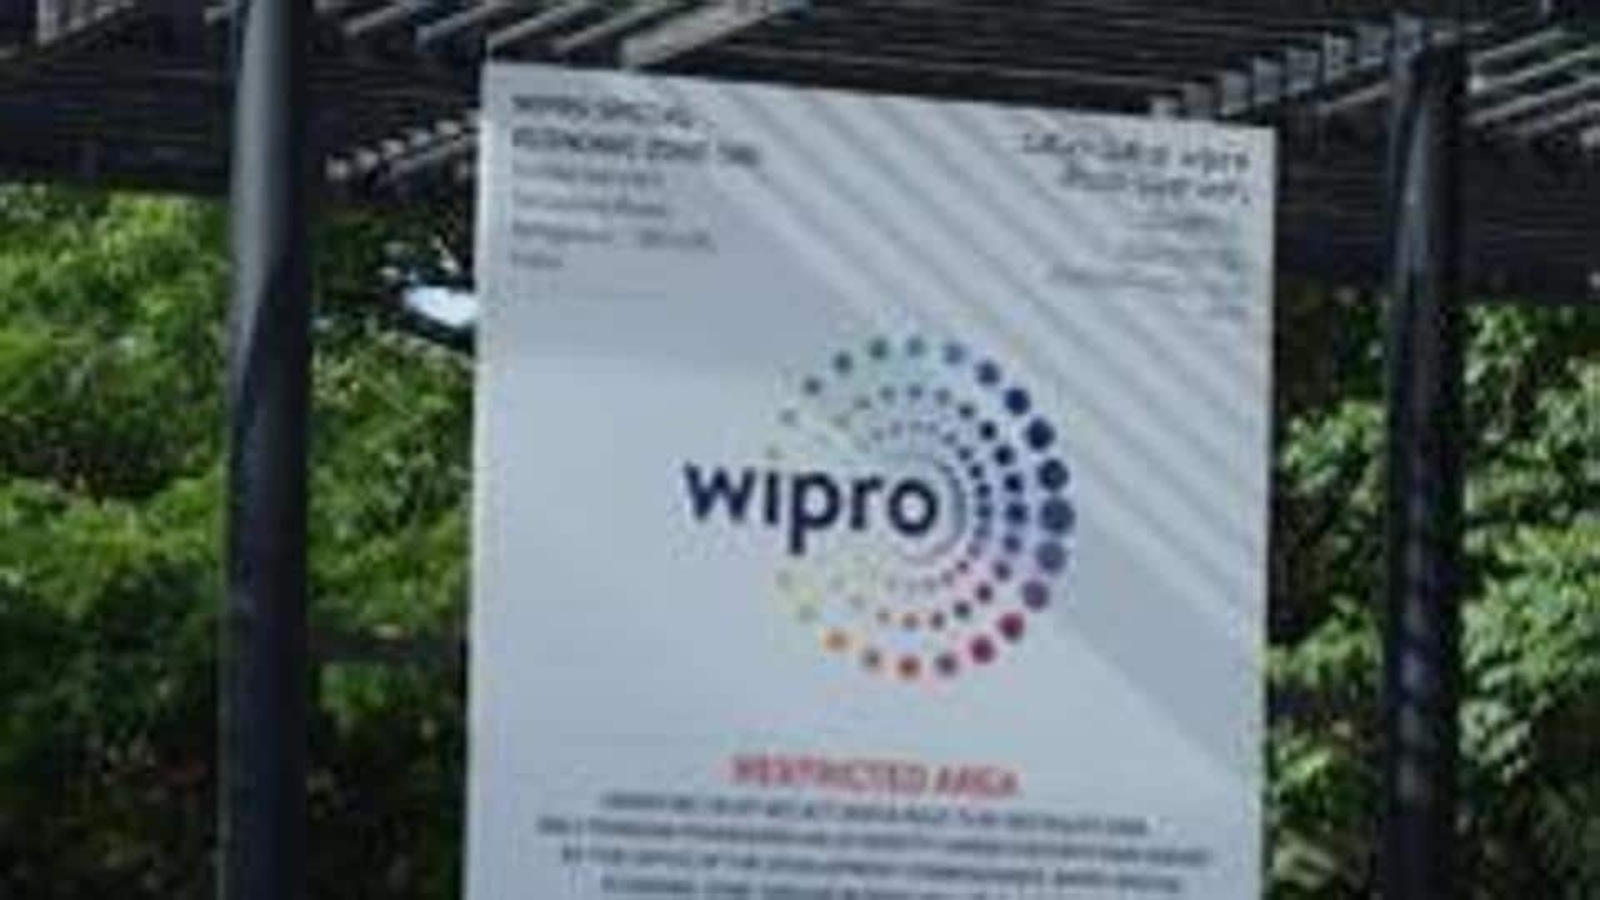 Wipro fires 300 employees for moonlighting - Hindustan Times